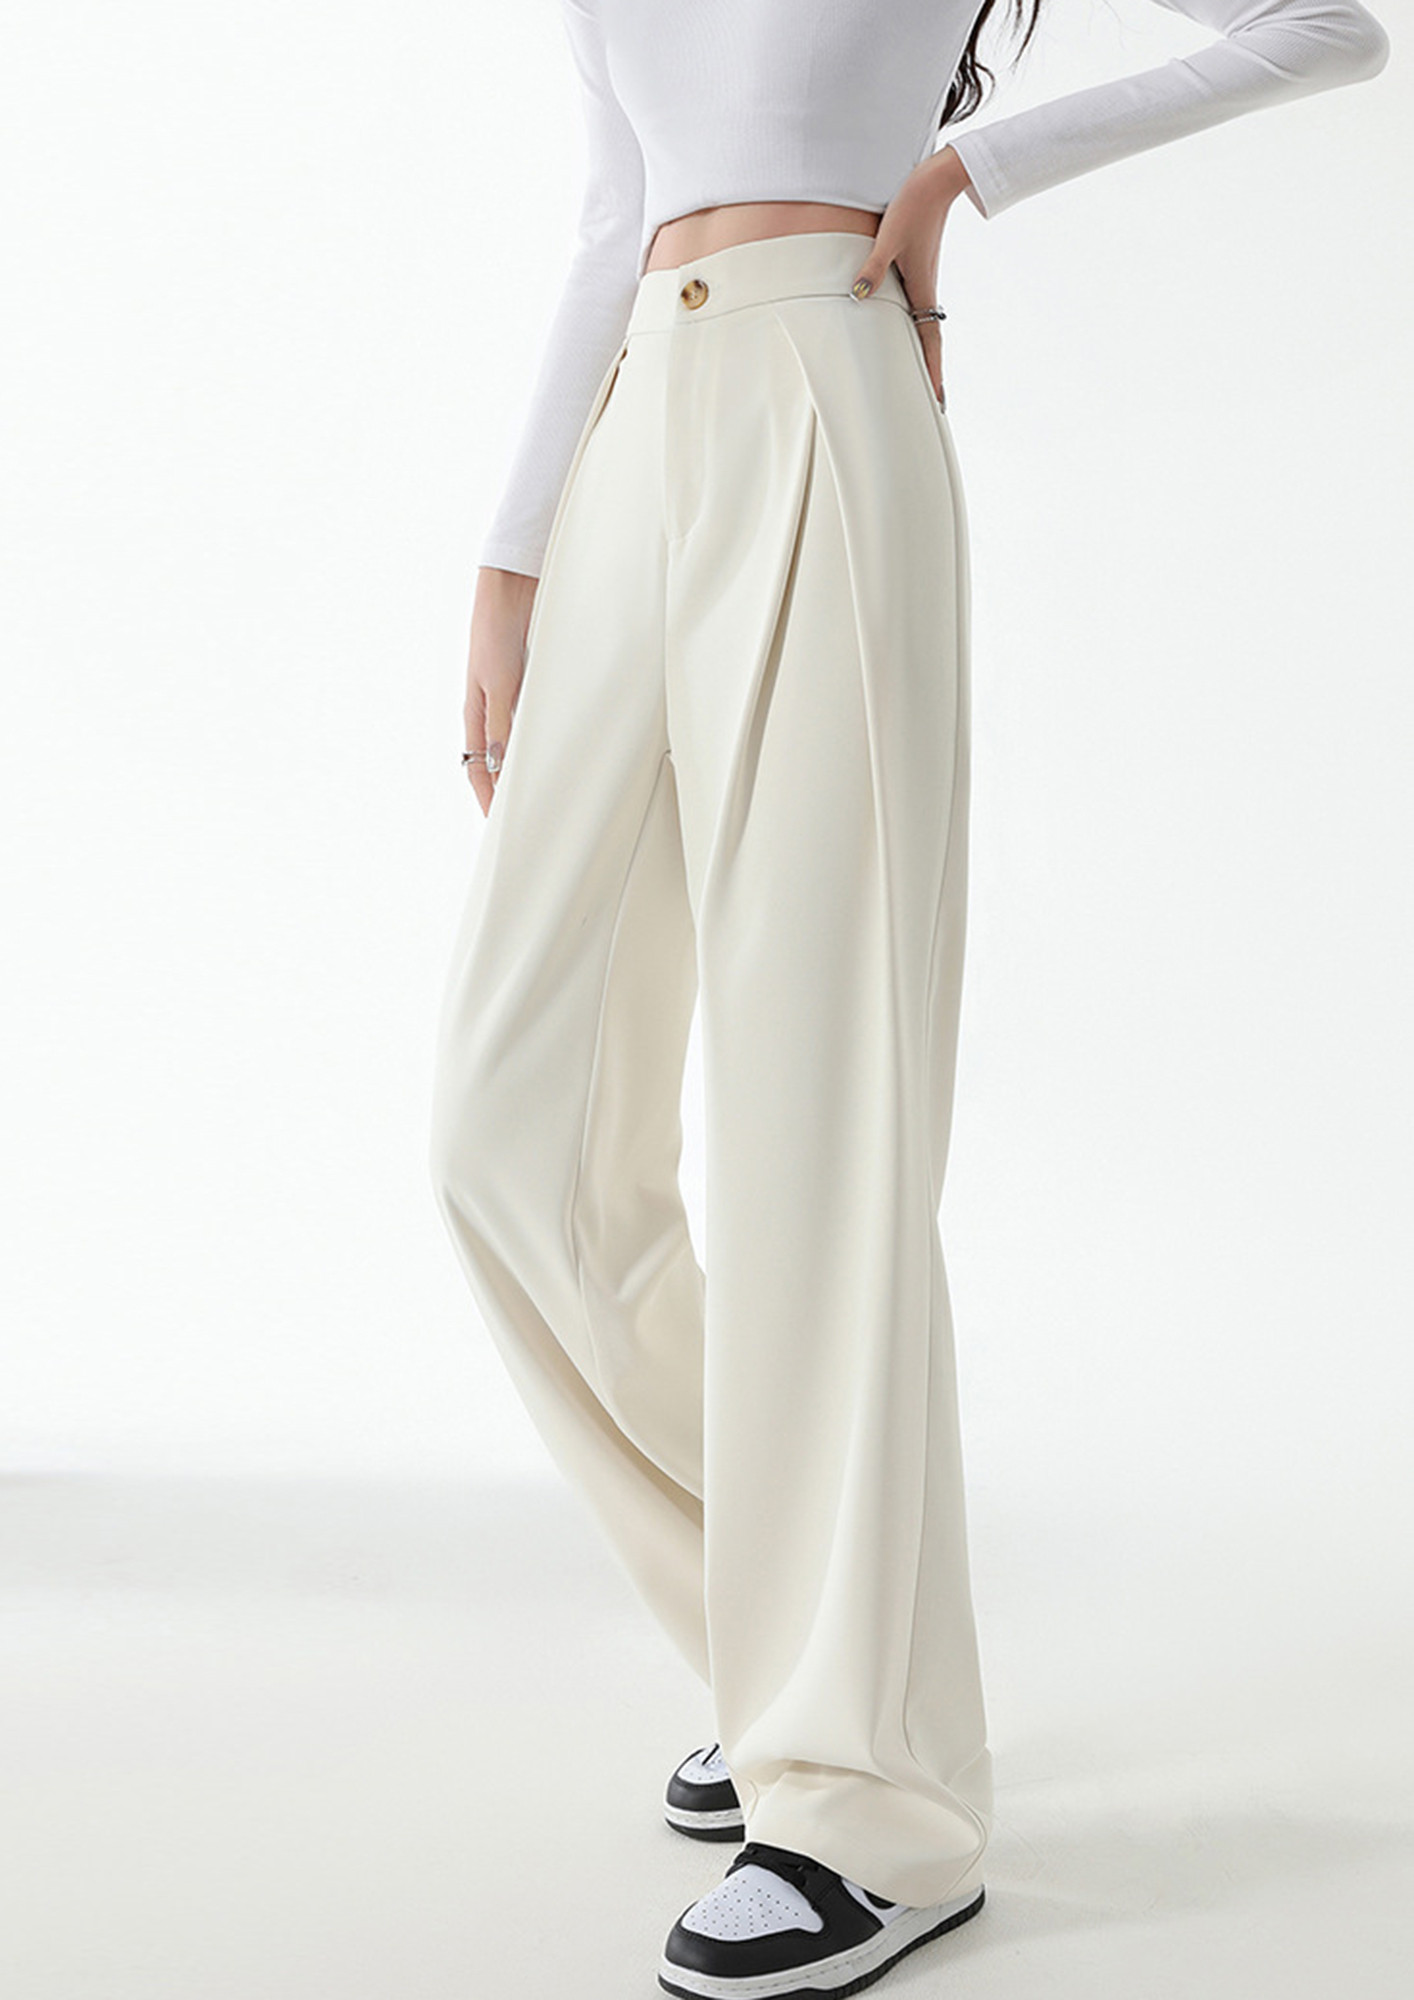 Designer High Waisted Pants for Women - Shop Now on FARFETCH-anthinhphatland.vn